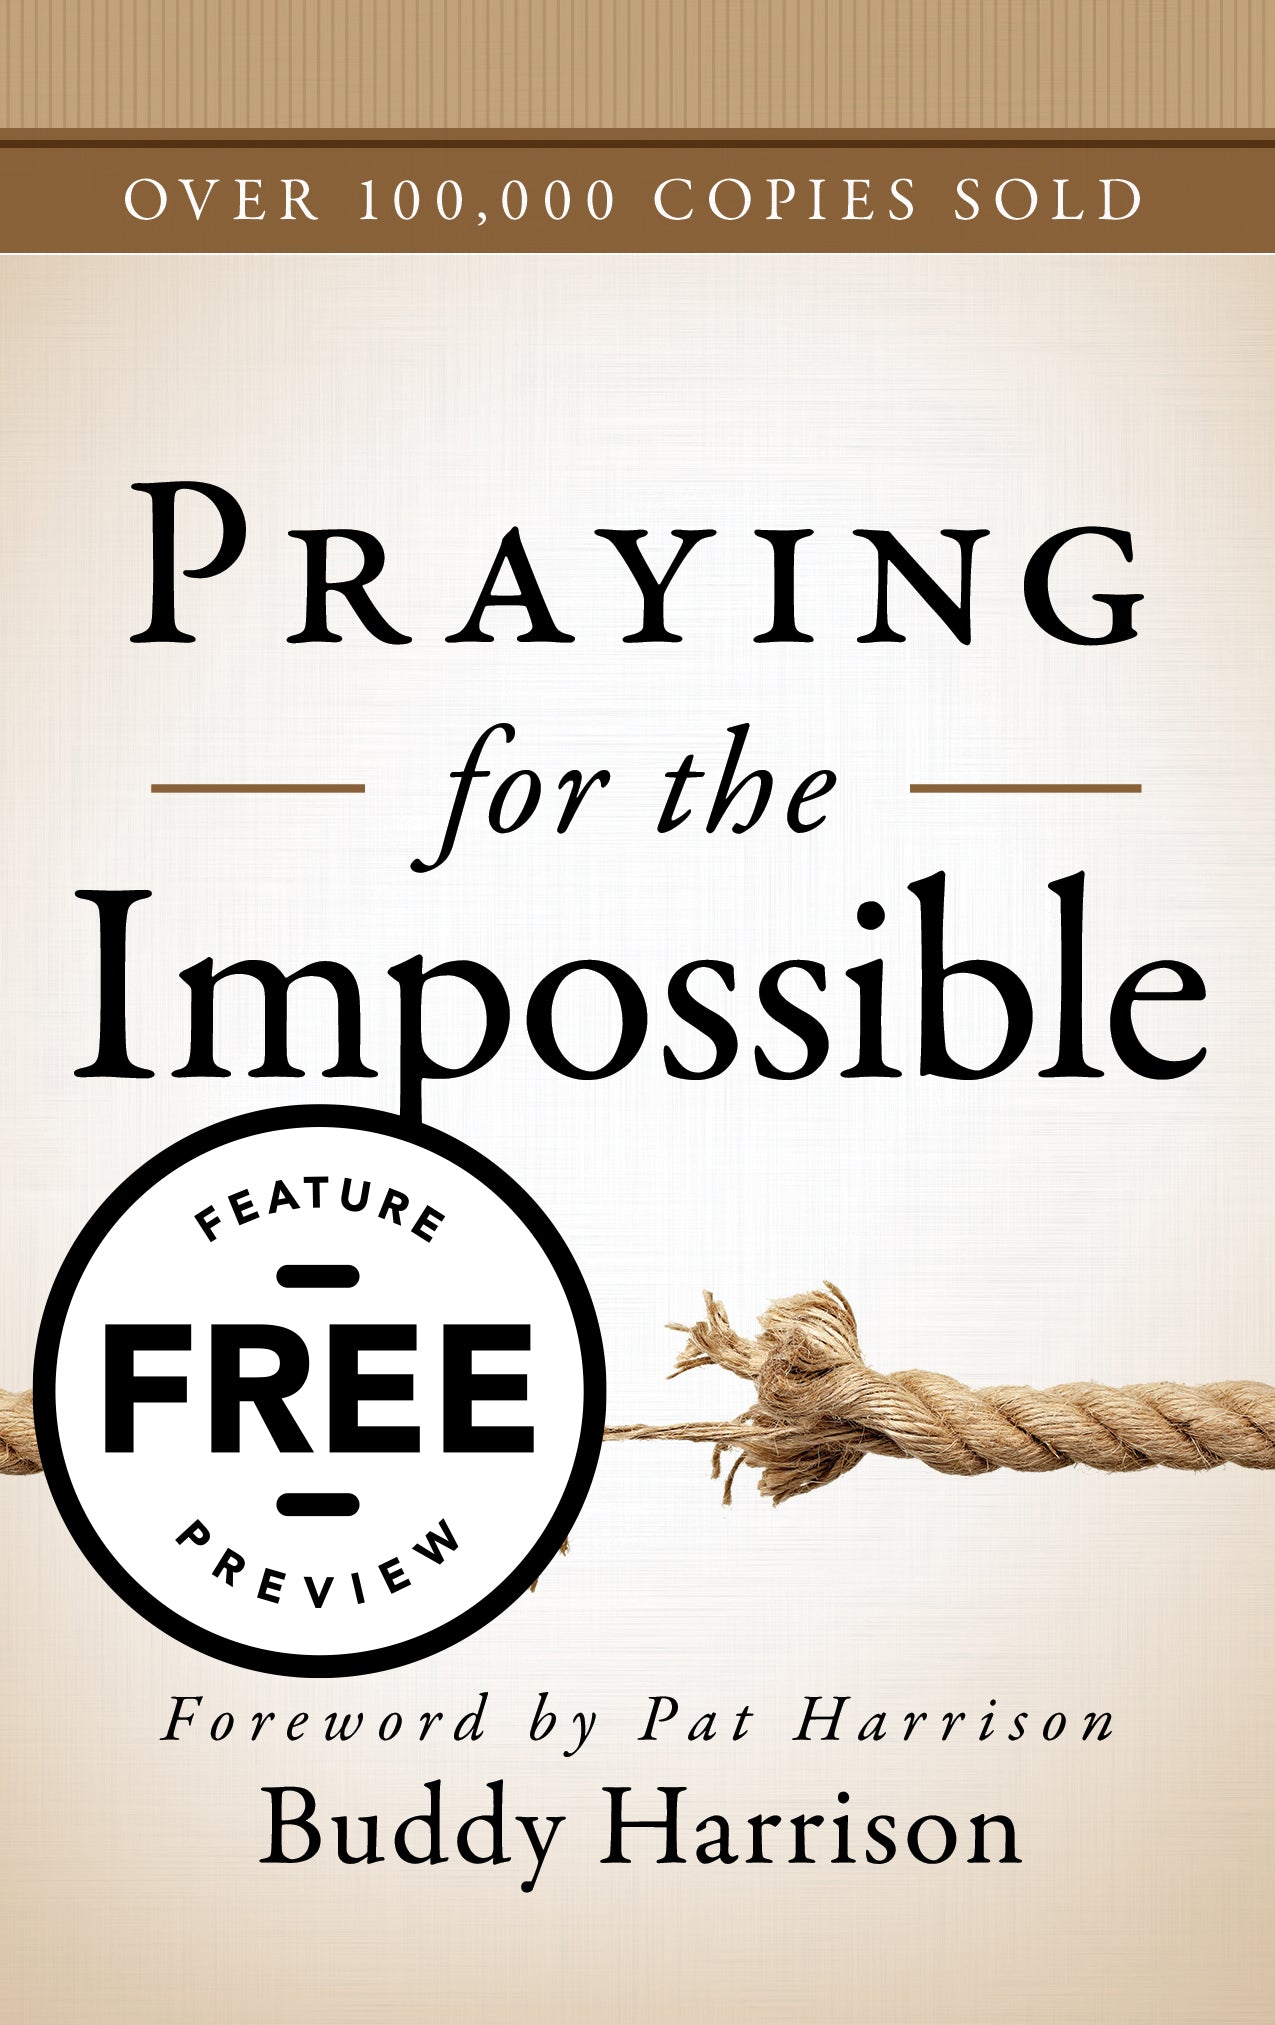 Praying for the Impossible Free Feature Message (PDF Download)